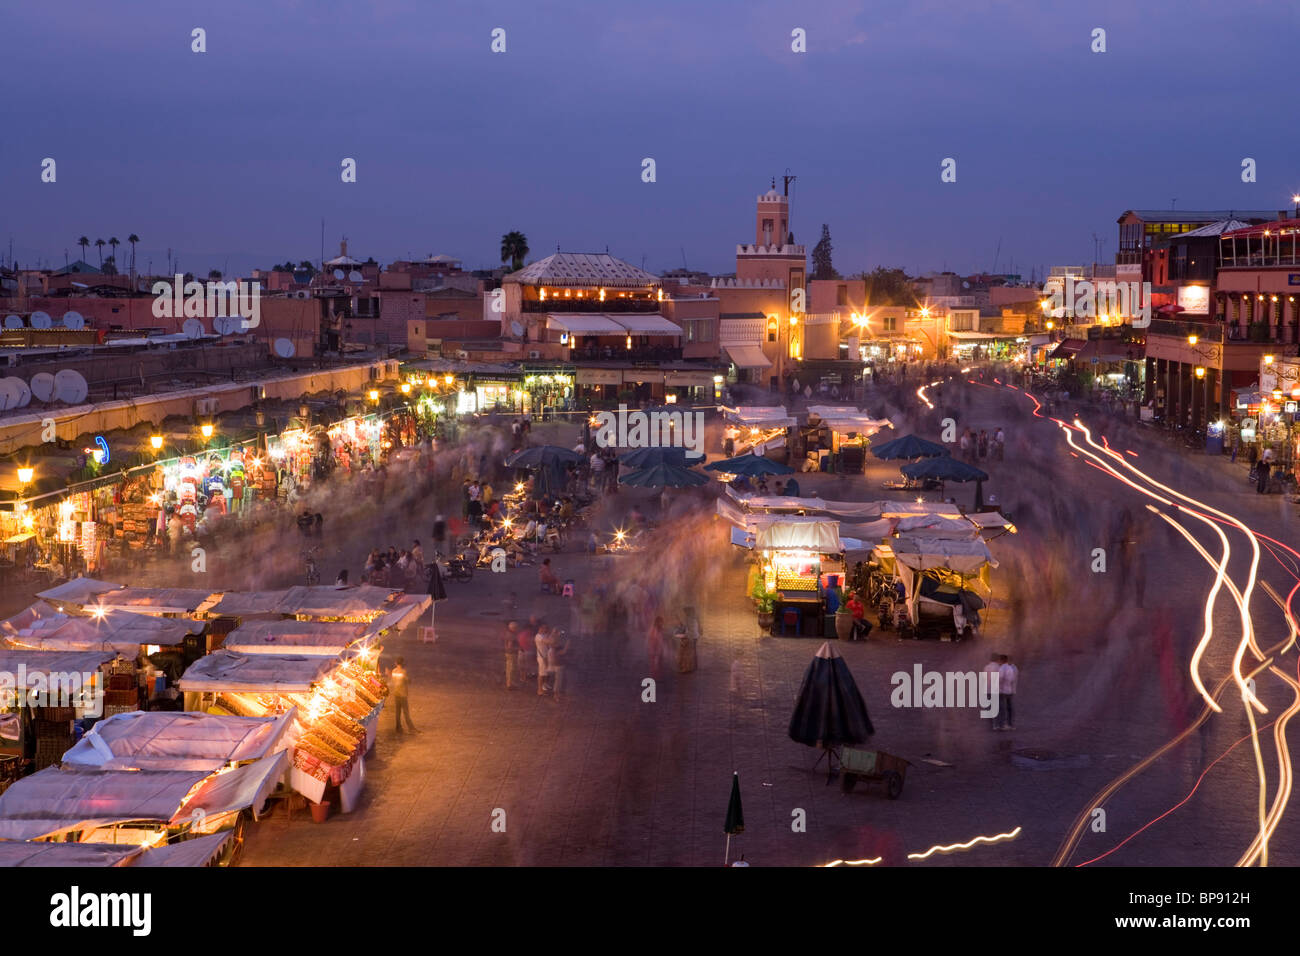 Djemaa el Fna Square at dusk, view from the terrace of Cafe Glacier, Marrakesh, Morocco, Africa Stock Photo